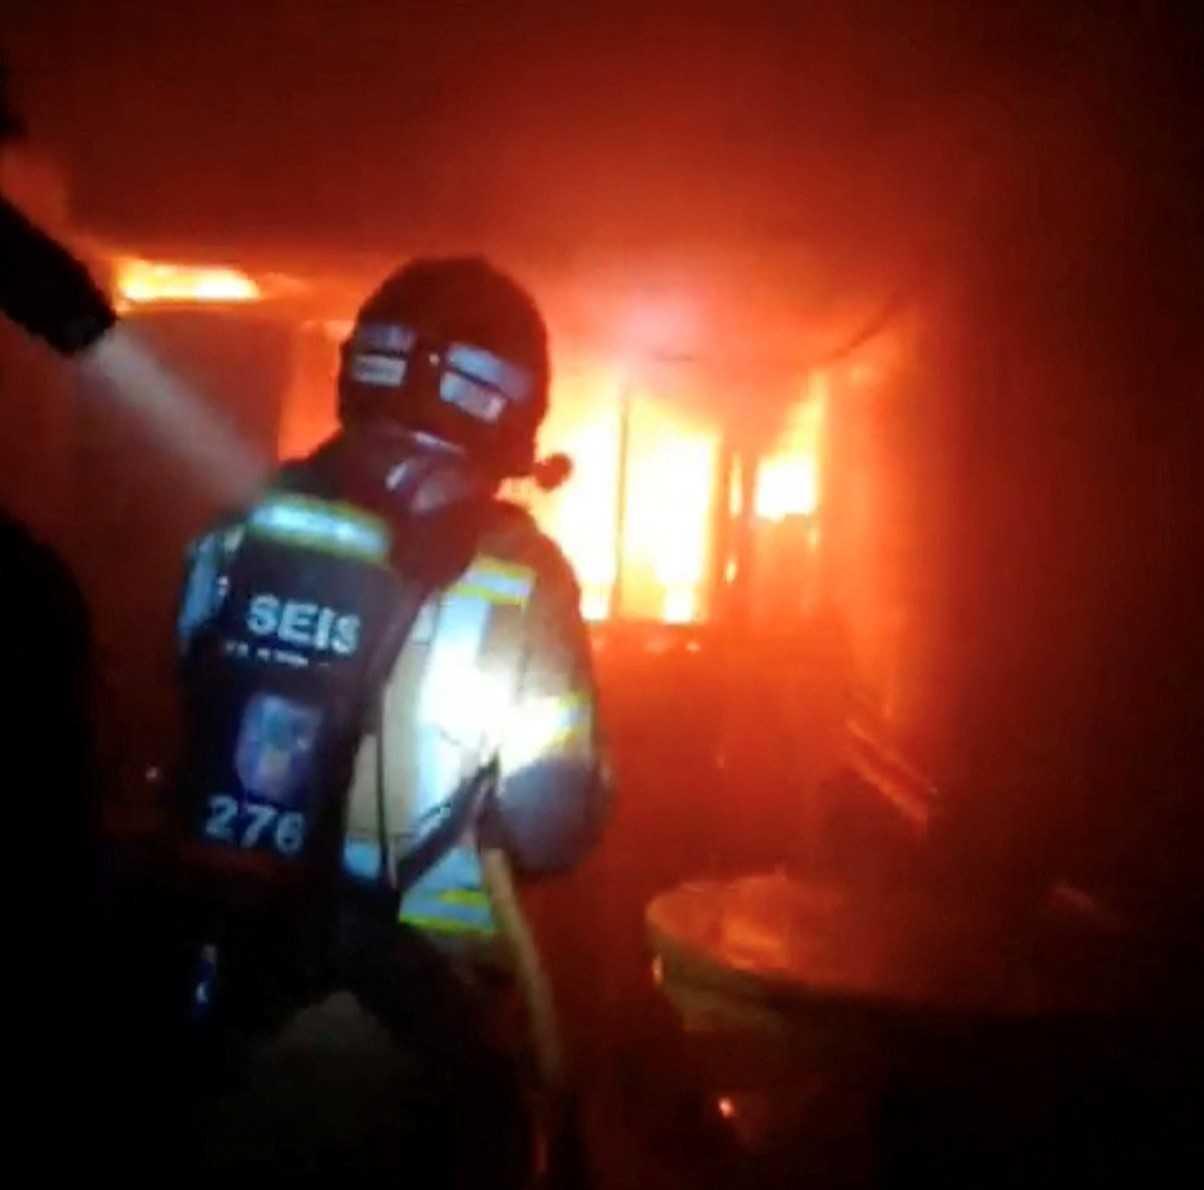 Firefighters work to control flames inside a nightclub in Murcia, Spain, Oct 1, in this screen grab obtained from a handout video. Photo: Reuters